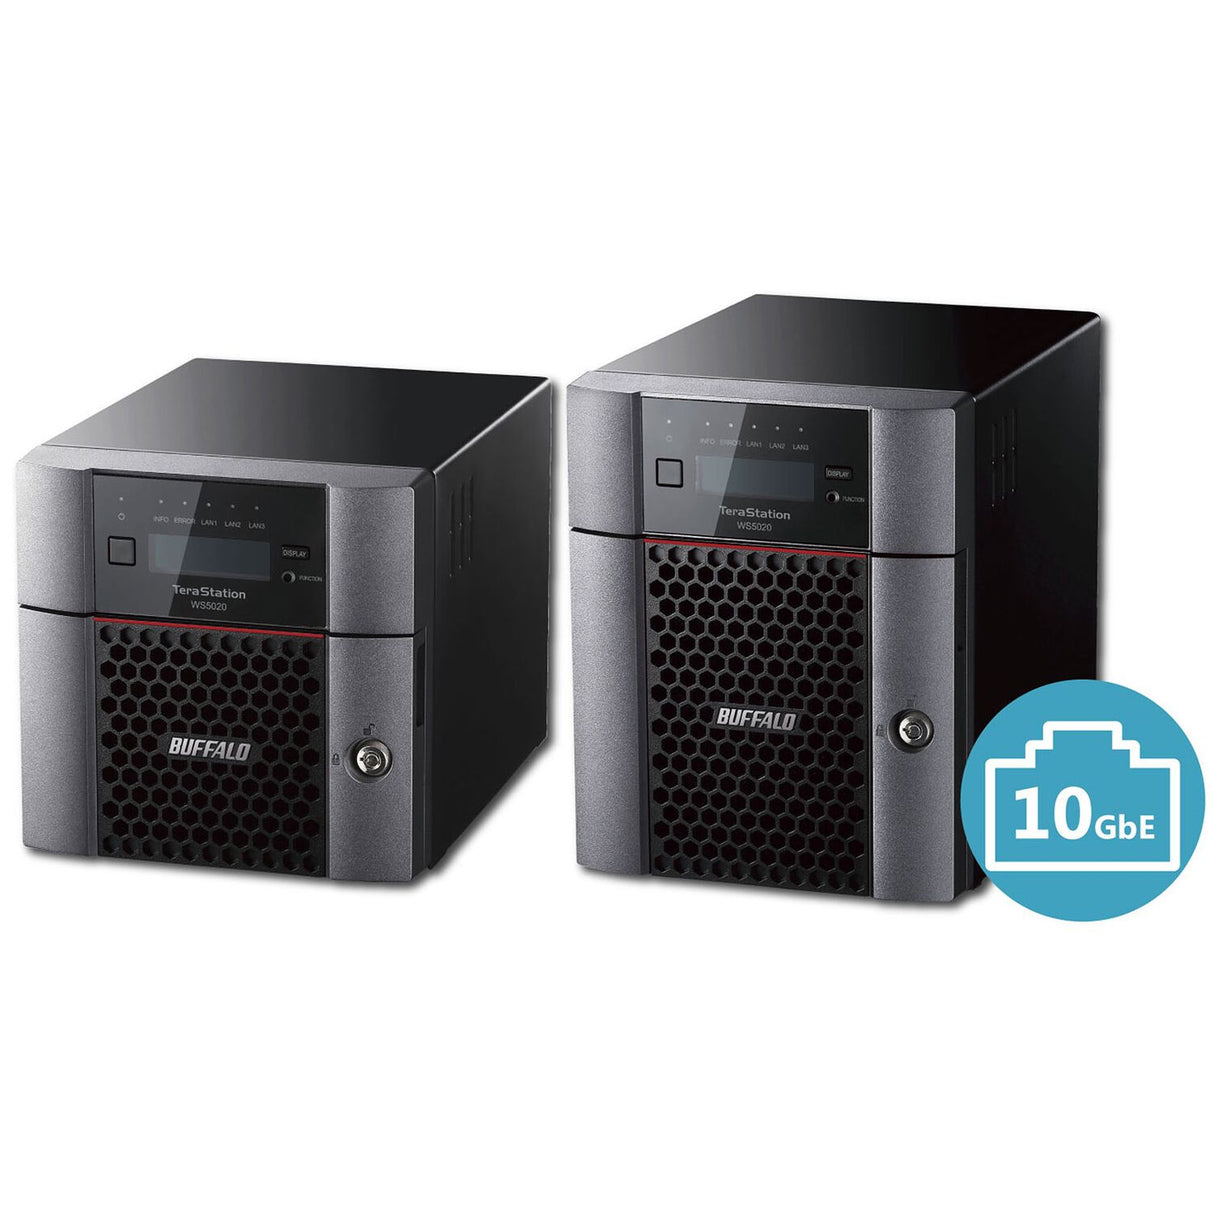 Buffalo TeraStation 5420DN Windows Server IoT 2019 Standard 8TB 4 Bay Desktop (4x2TB) NAS Hard Drives Included RAID iSCSI - Intel Atom C3338 Dual-core (2 Core) 1.50 GHz - 4 x HDD Supported - 32 TB Supported HDD Capacity - 4 x HDD Installed